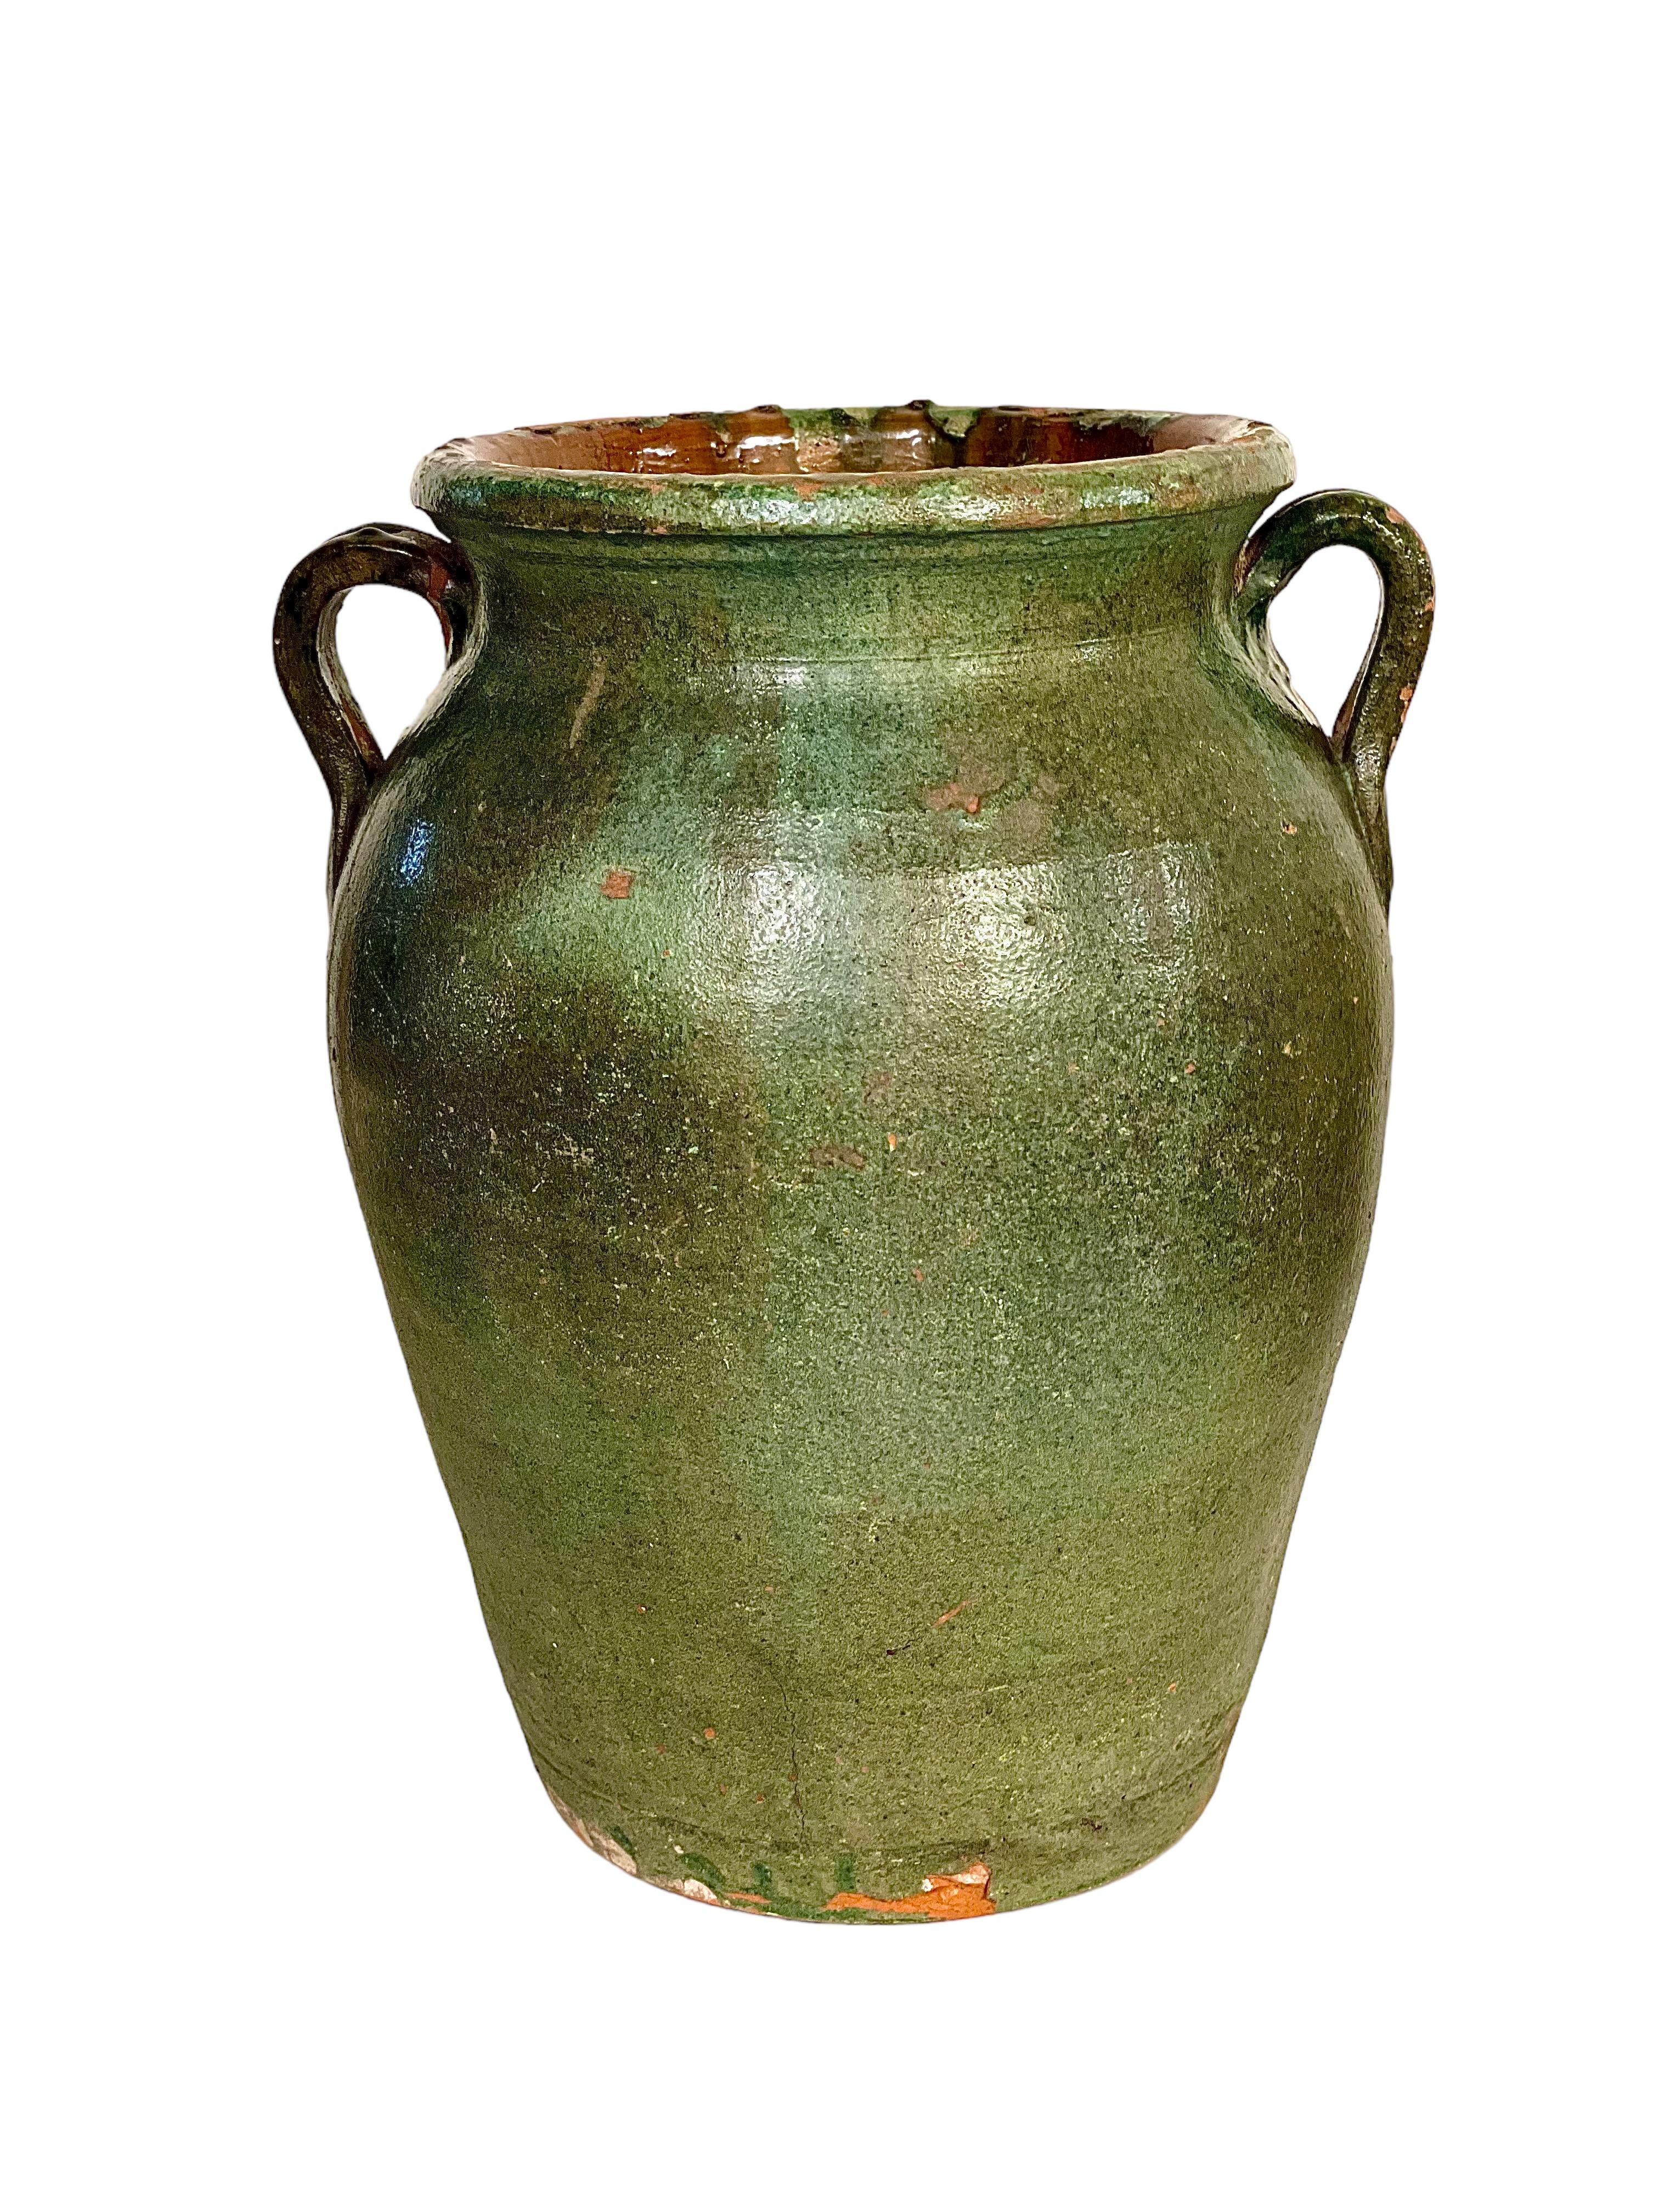 Rustic Large Green Terracotta Confit Pot, France 19th Century For Sale